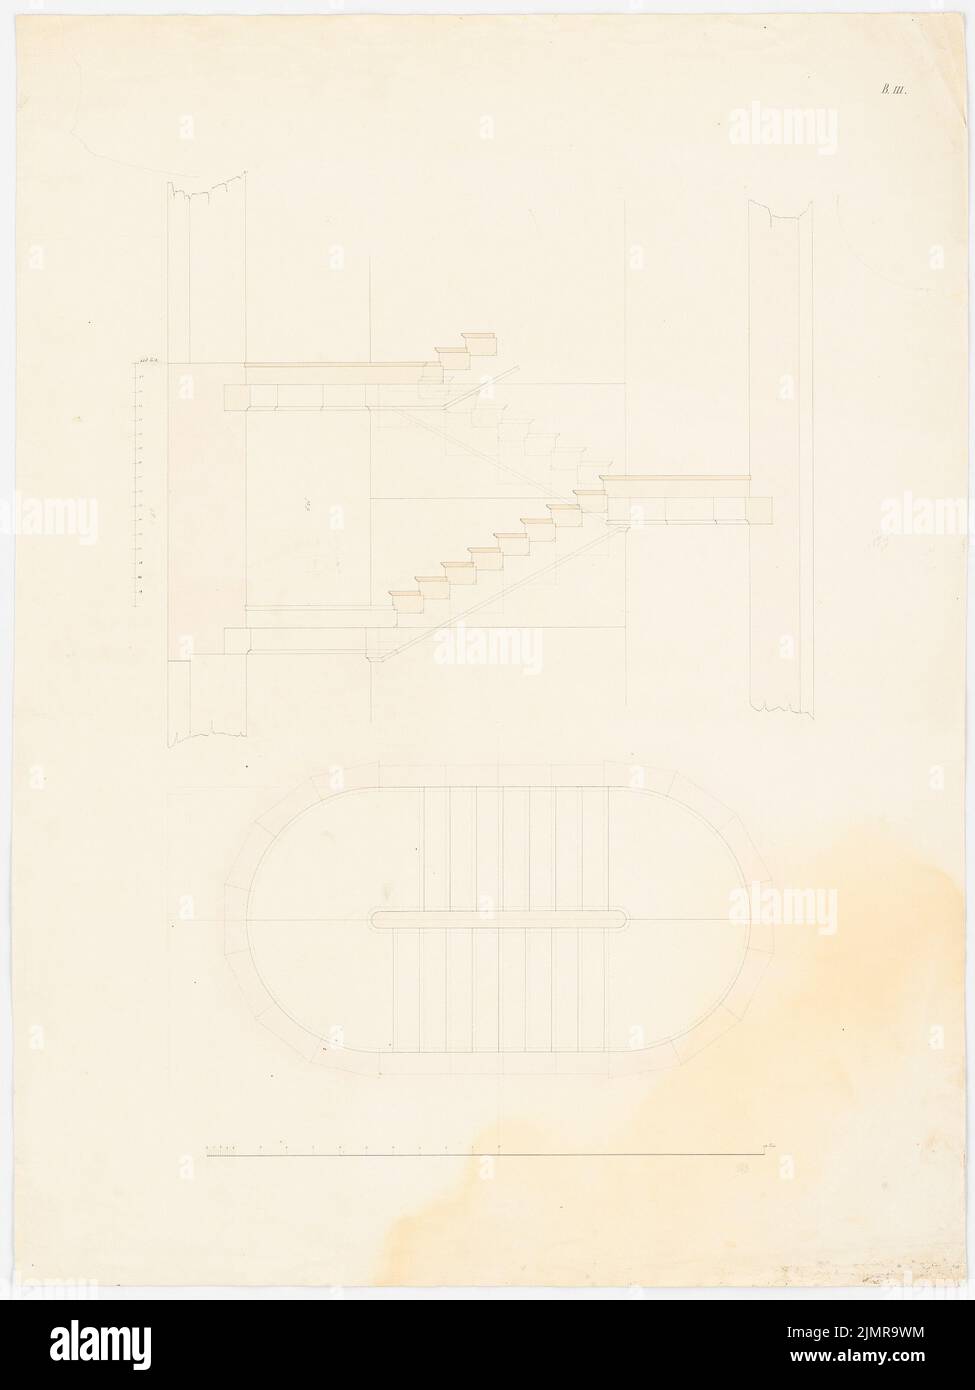 Langhans Carl Ferdinand (1782-1869), Royal Opera in Berlin. Reconstruction (18.08.1843): B III: Western gallery staircase for 2nd place in floor plan and cut. Ink, ink colored, watercolor on paper, 79.1 x 59.4 cm (including scan edges) Langhans Carl Ferdinand  (1782-1869): Königliche Oper, Berlin. Wiederaufbau Stock Photo